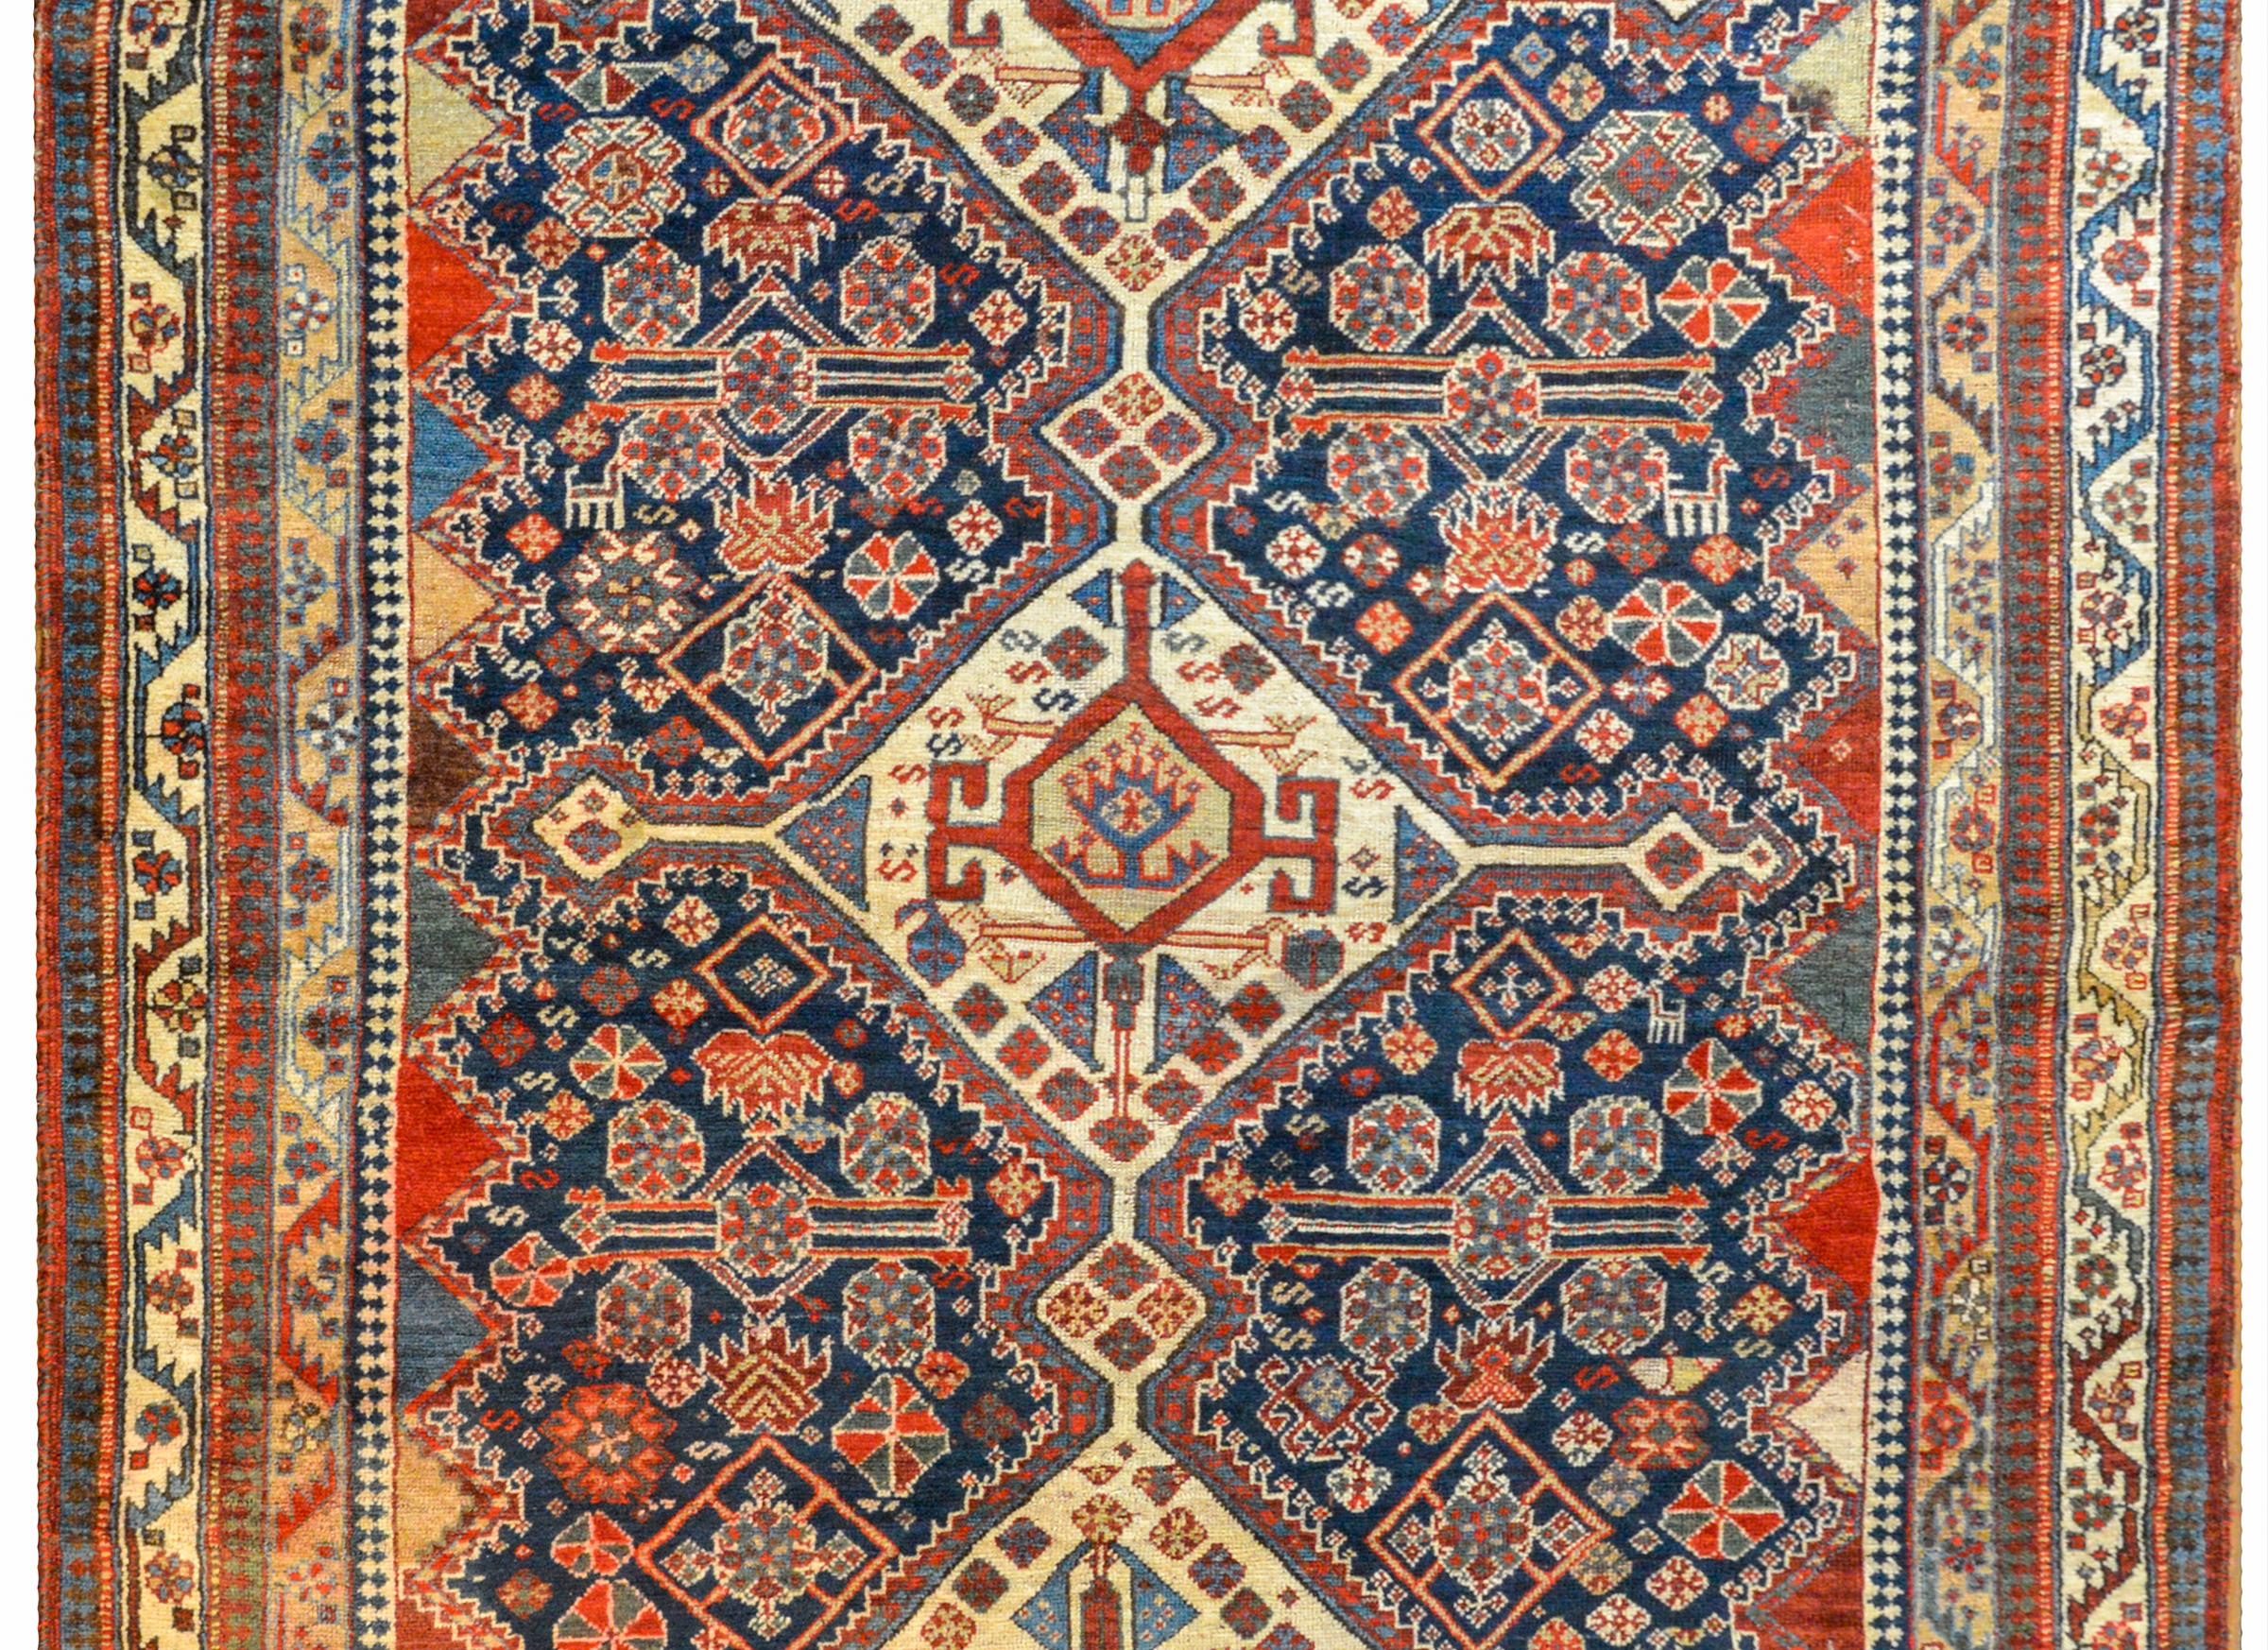 An extraordinary early 20th century Persian Ghashgaei rug with three large central diamond medallions on a field of densely woven myriad stylized flowers and goats woven in crimson, light indigo, and cream, on a dark indigo background. The border is